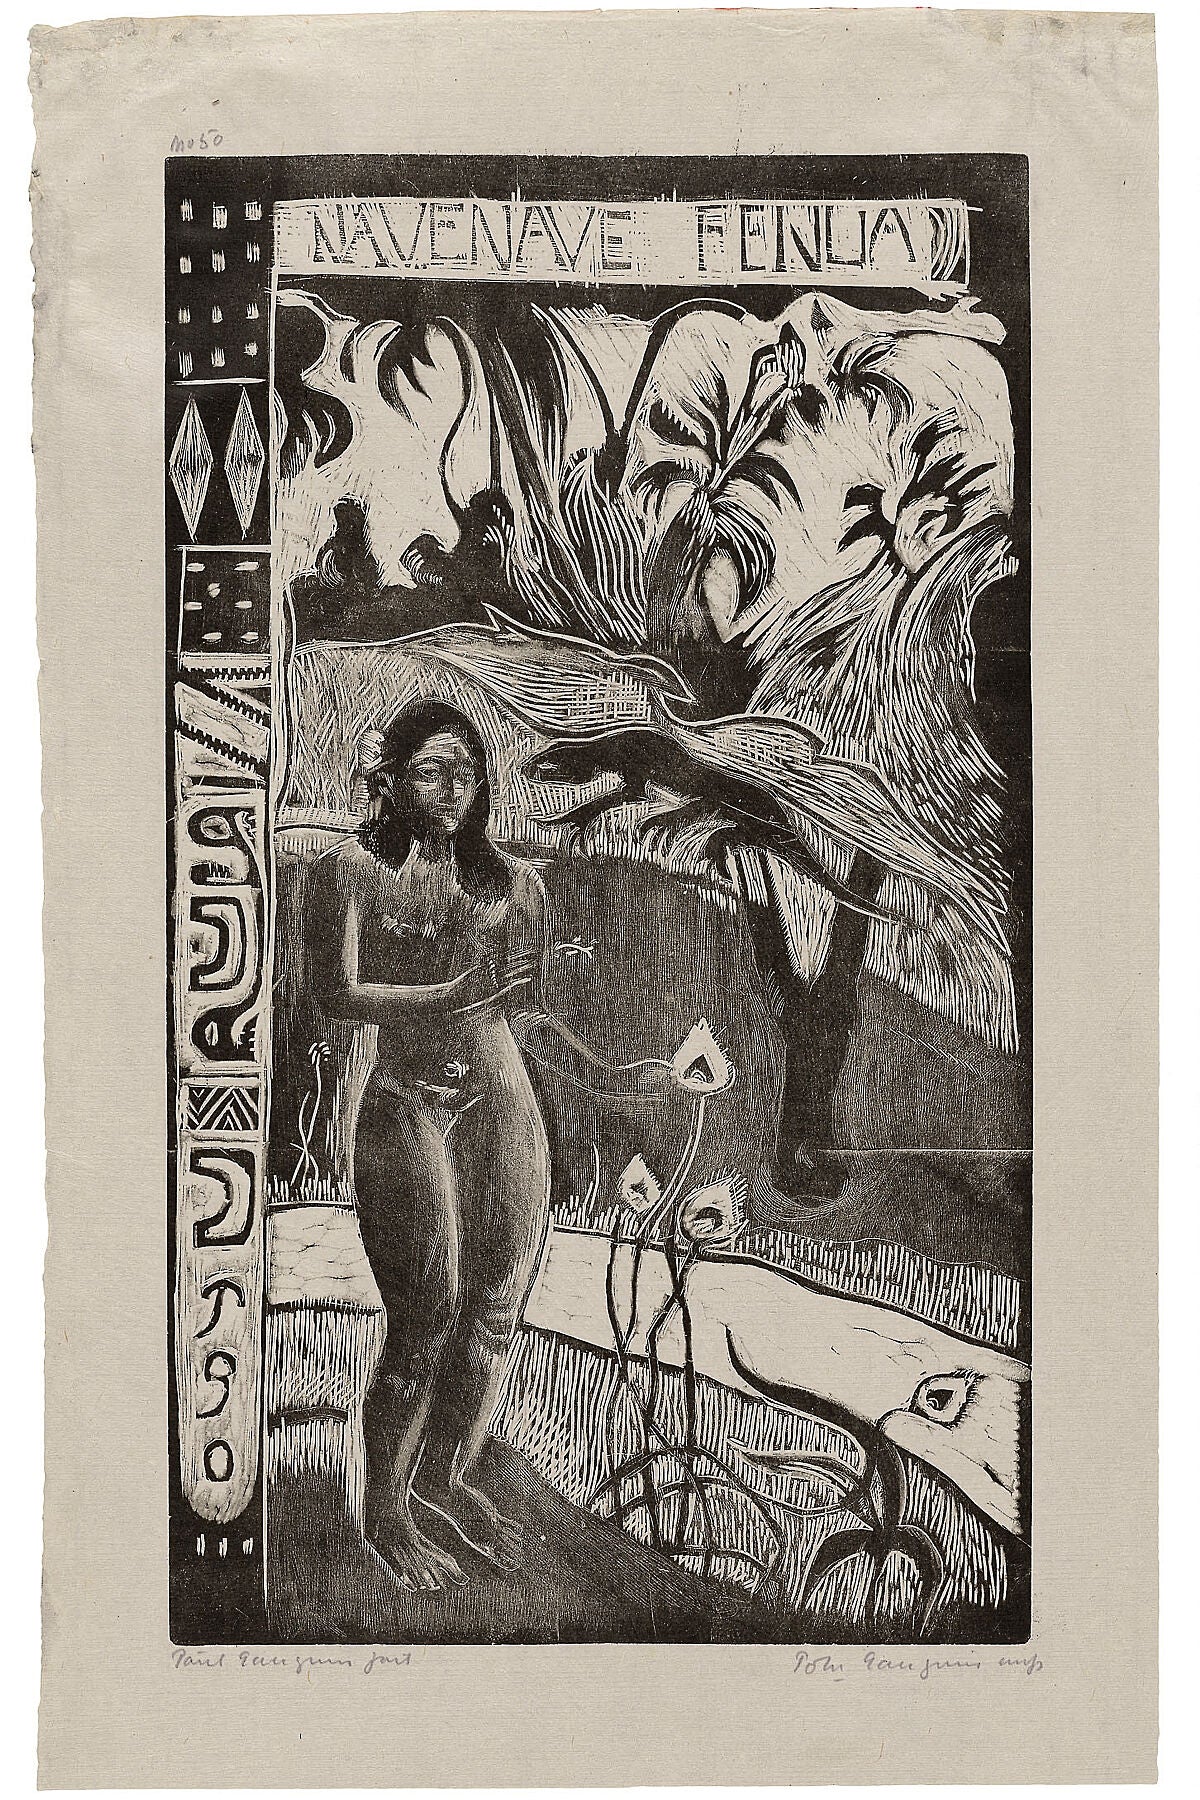 Nave nave fenua (Delightful Land), from the Noa Noa Suite Date- 1893_94, printed 1921 Paul Gauguin